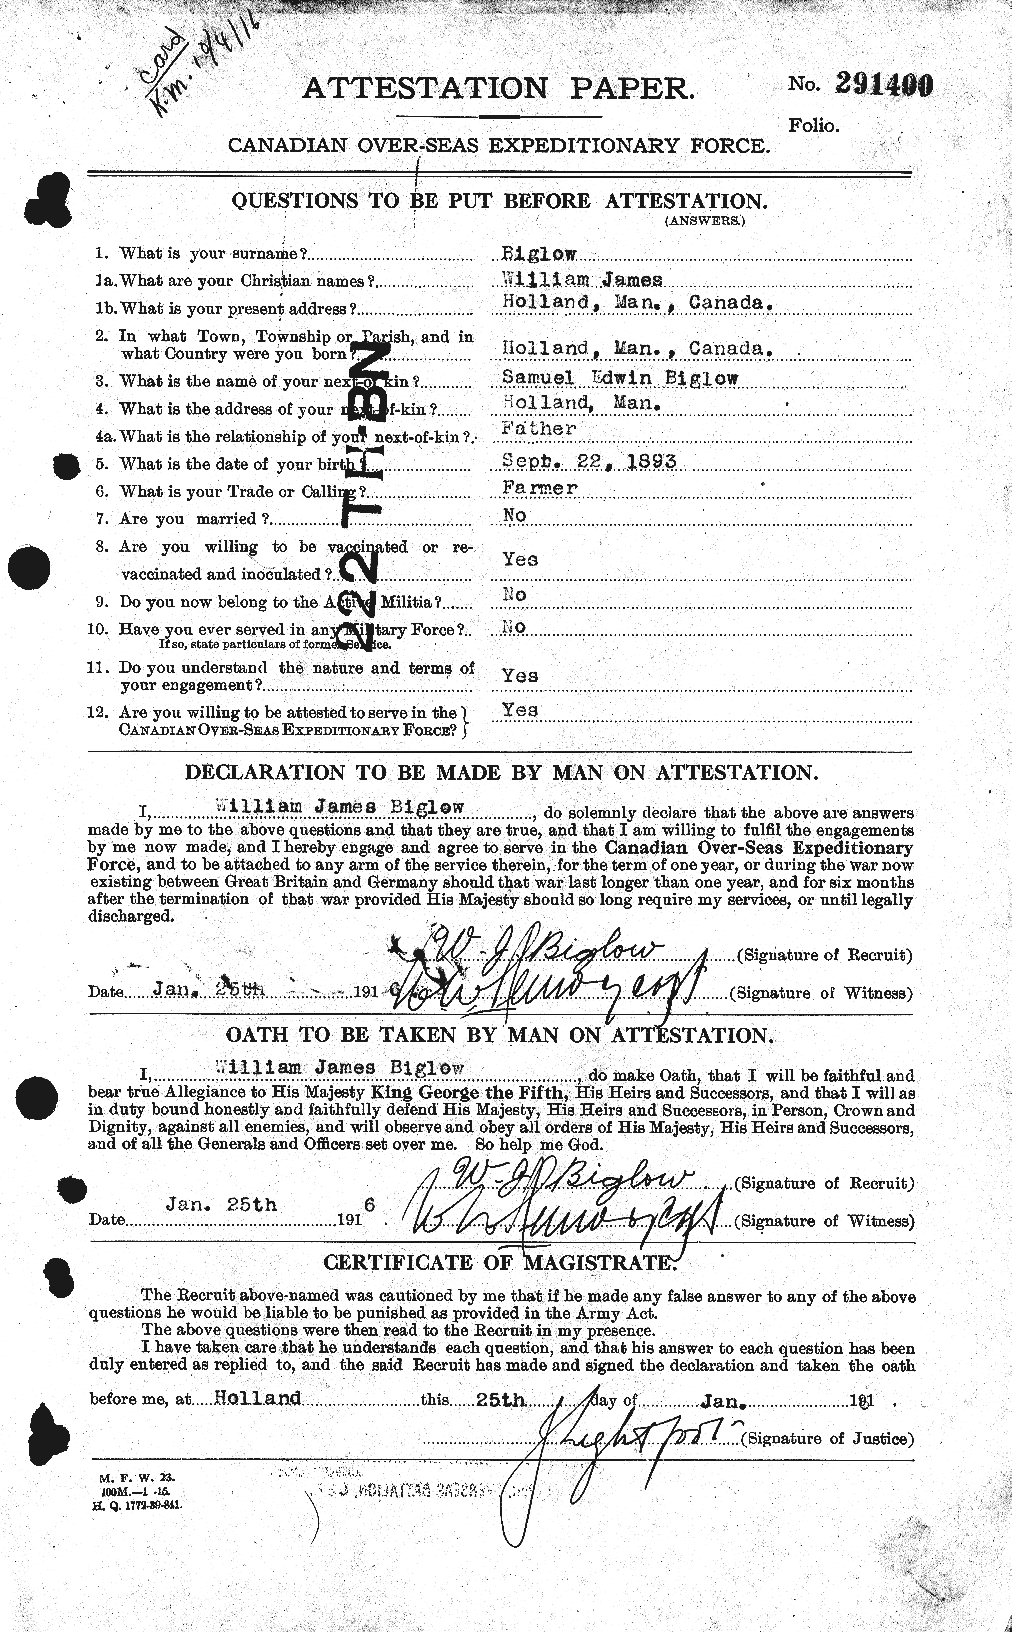 Personnel Records of the First World War - CEF 239111a